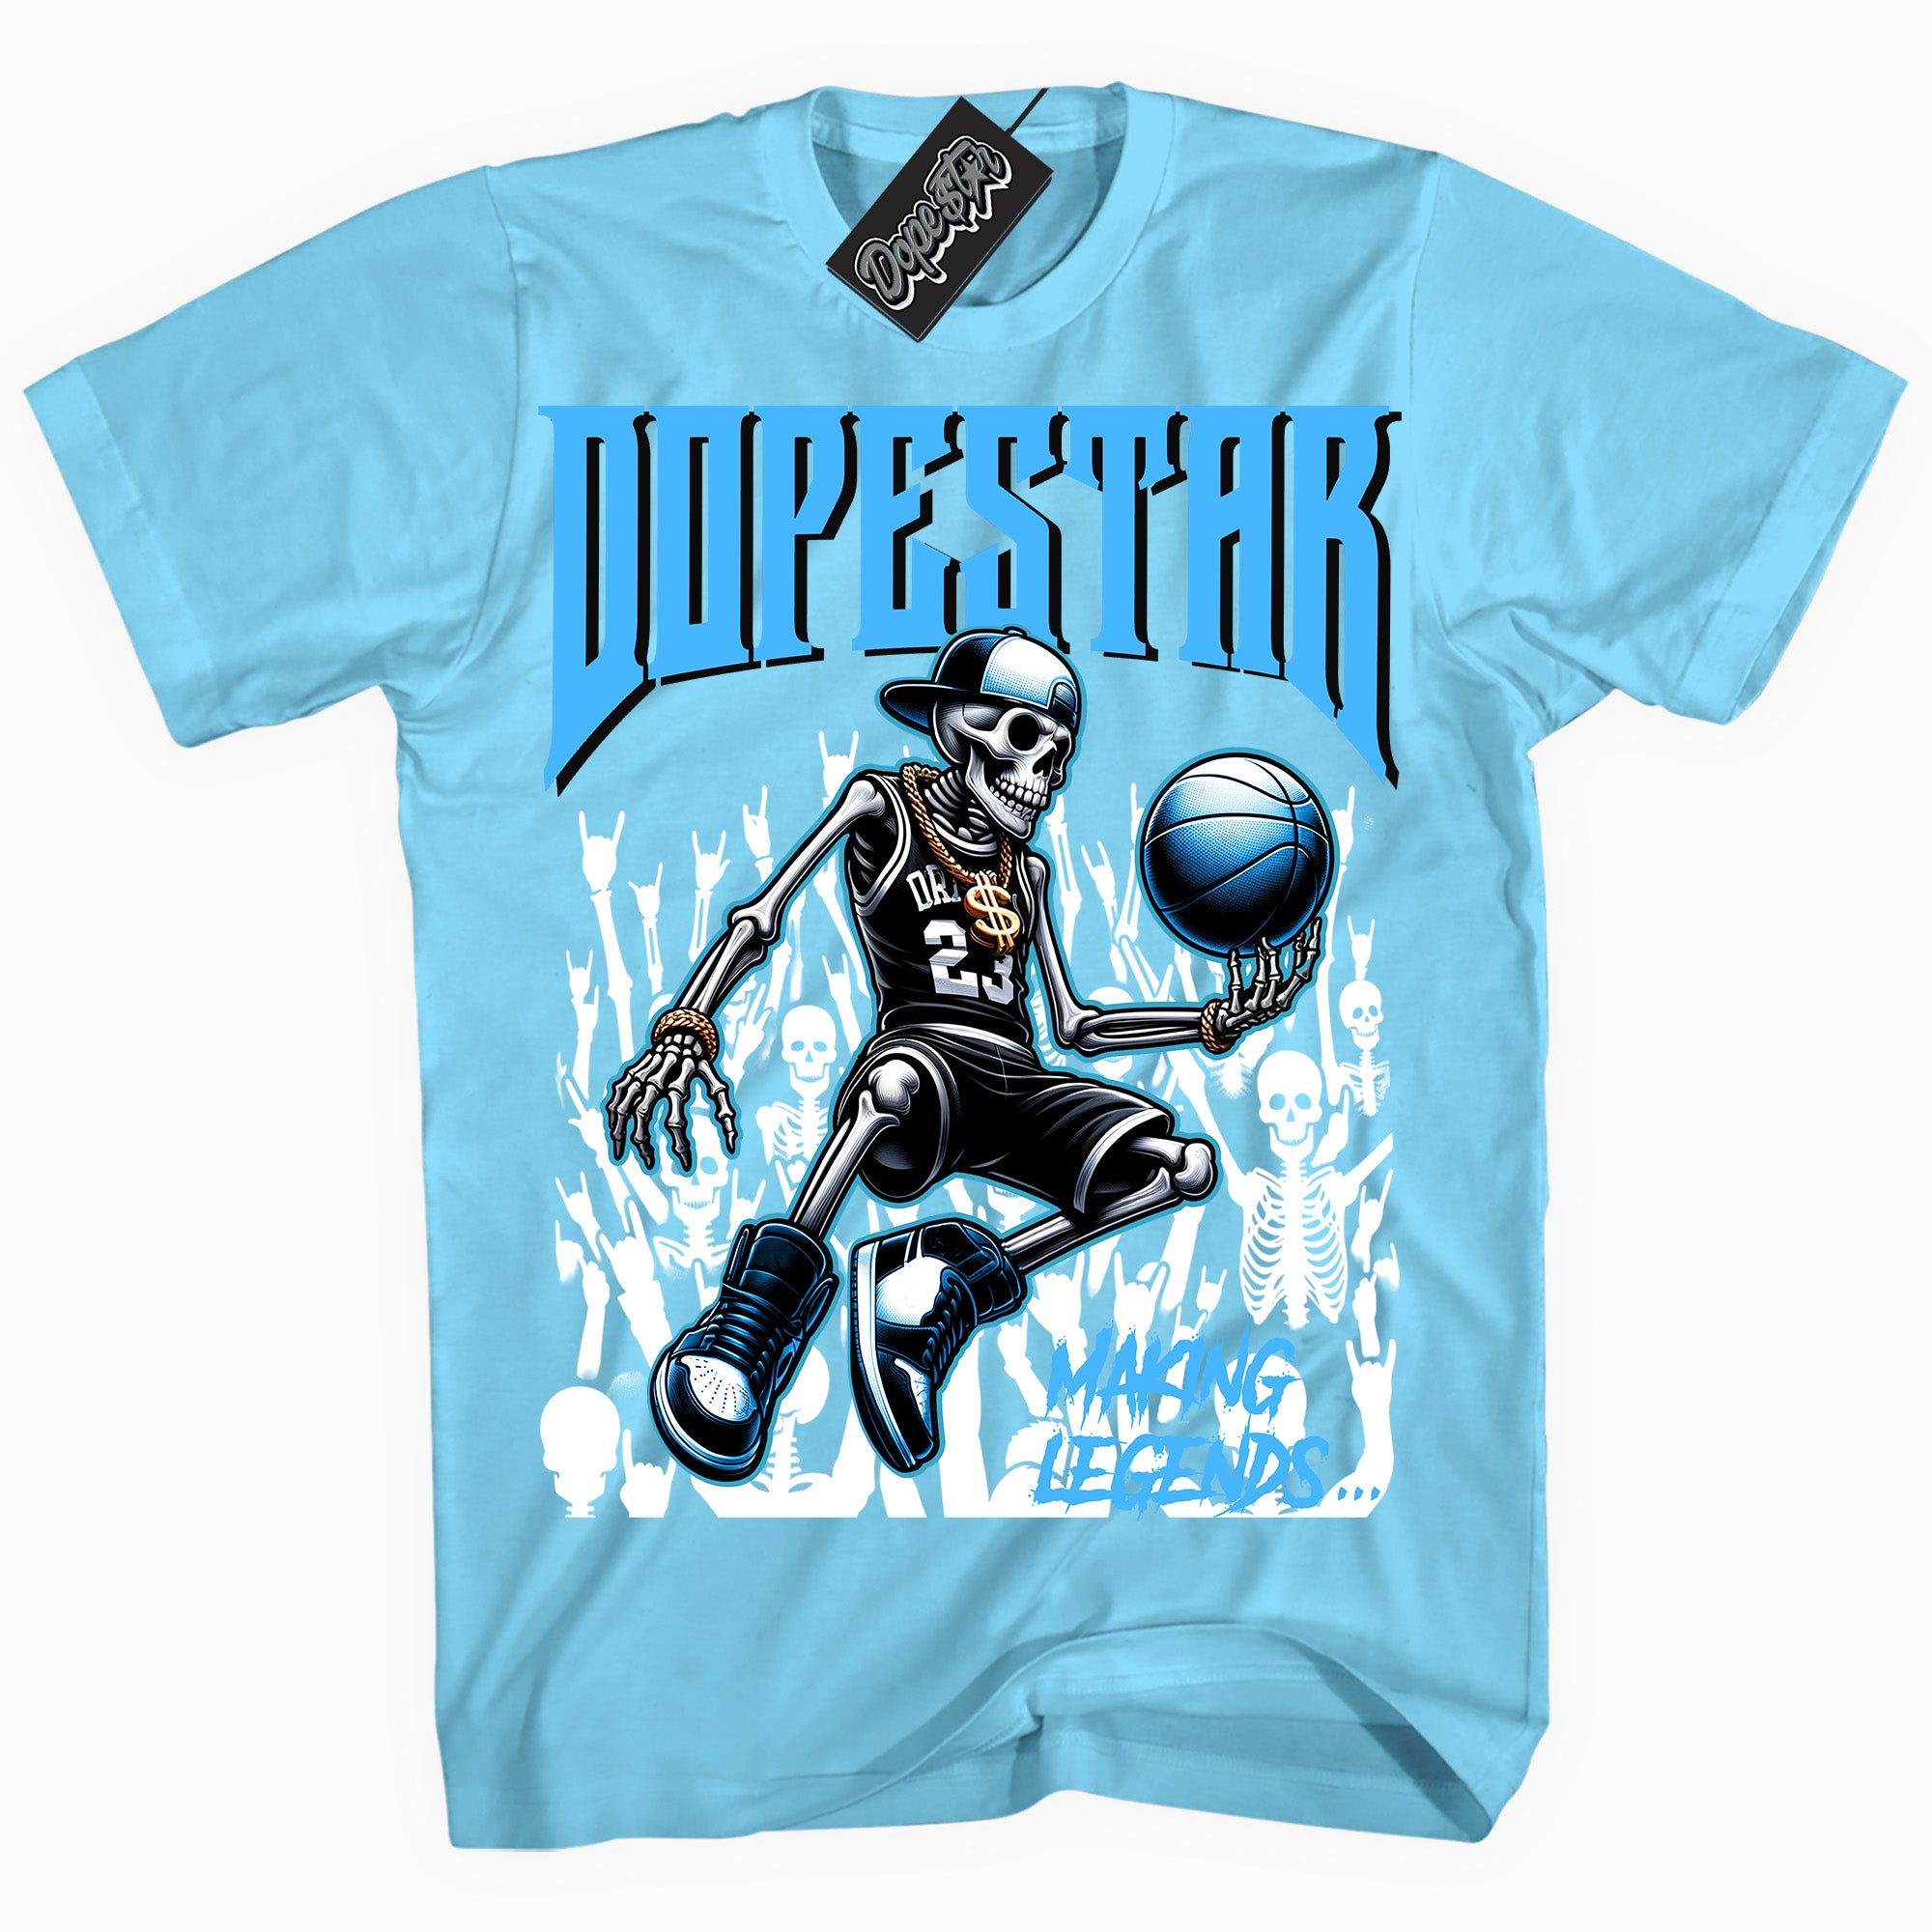 Cool Sky Blue graphic tee with “ Making Legends ” design, that perfectly matches Powder Blue 9s sneakers